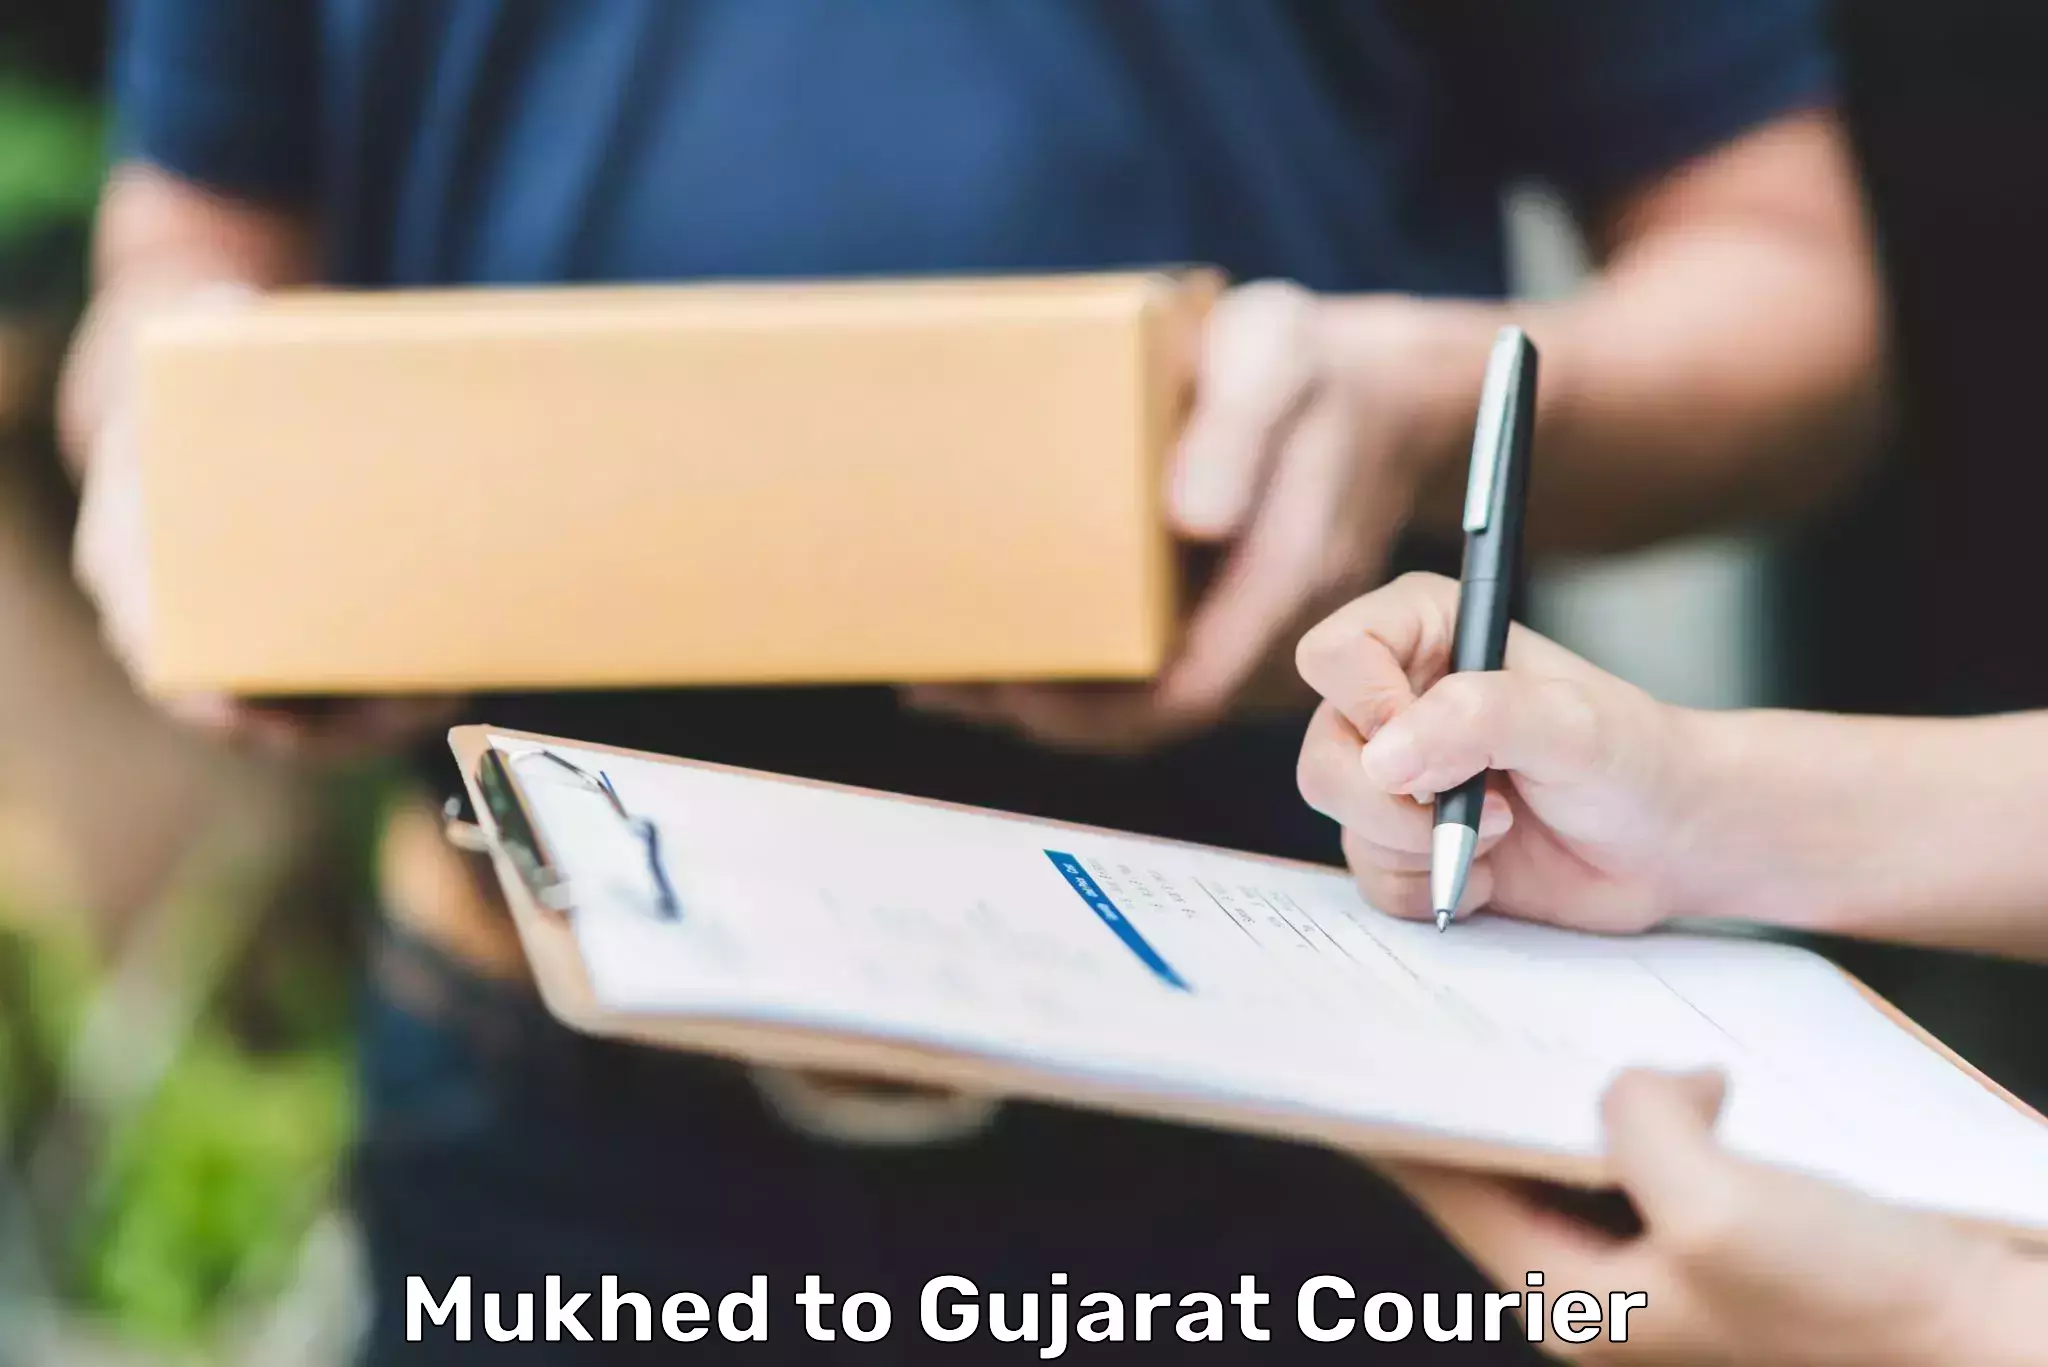 State-of-the-art courier technology Mukhed to Gujarat